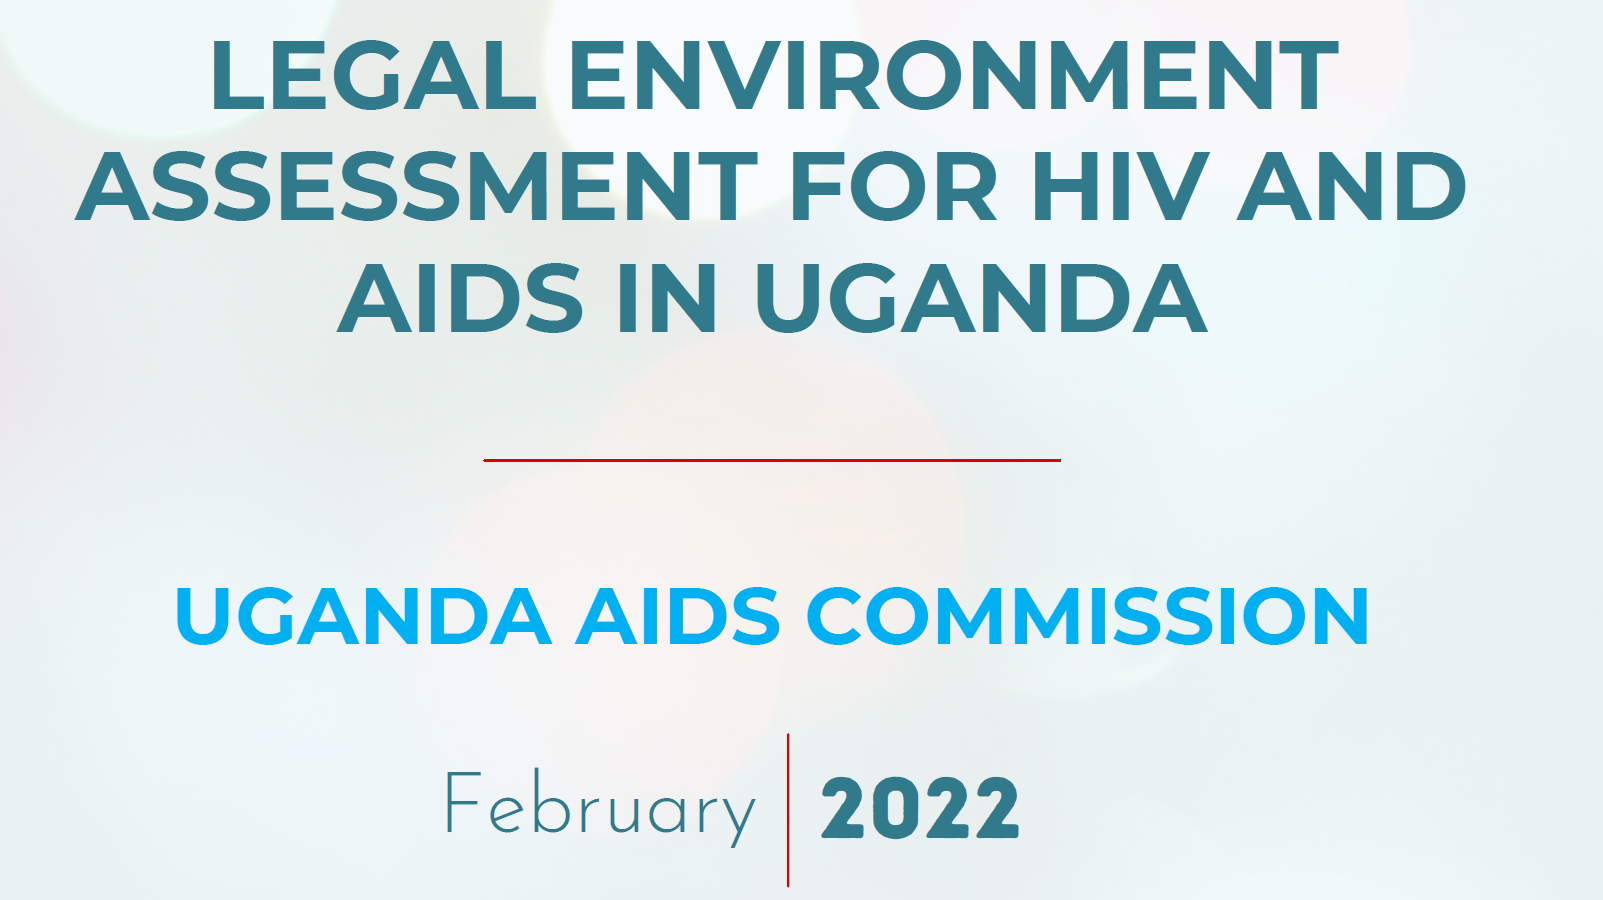 LEGAL ENVIRONMENT ASSESSMENT FOR HIV AND AIDS IN UGANDA